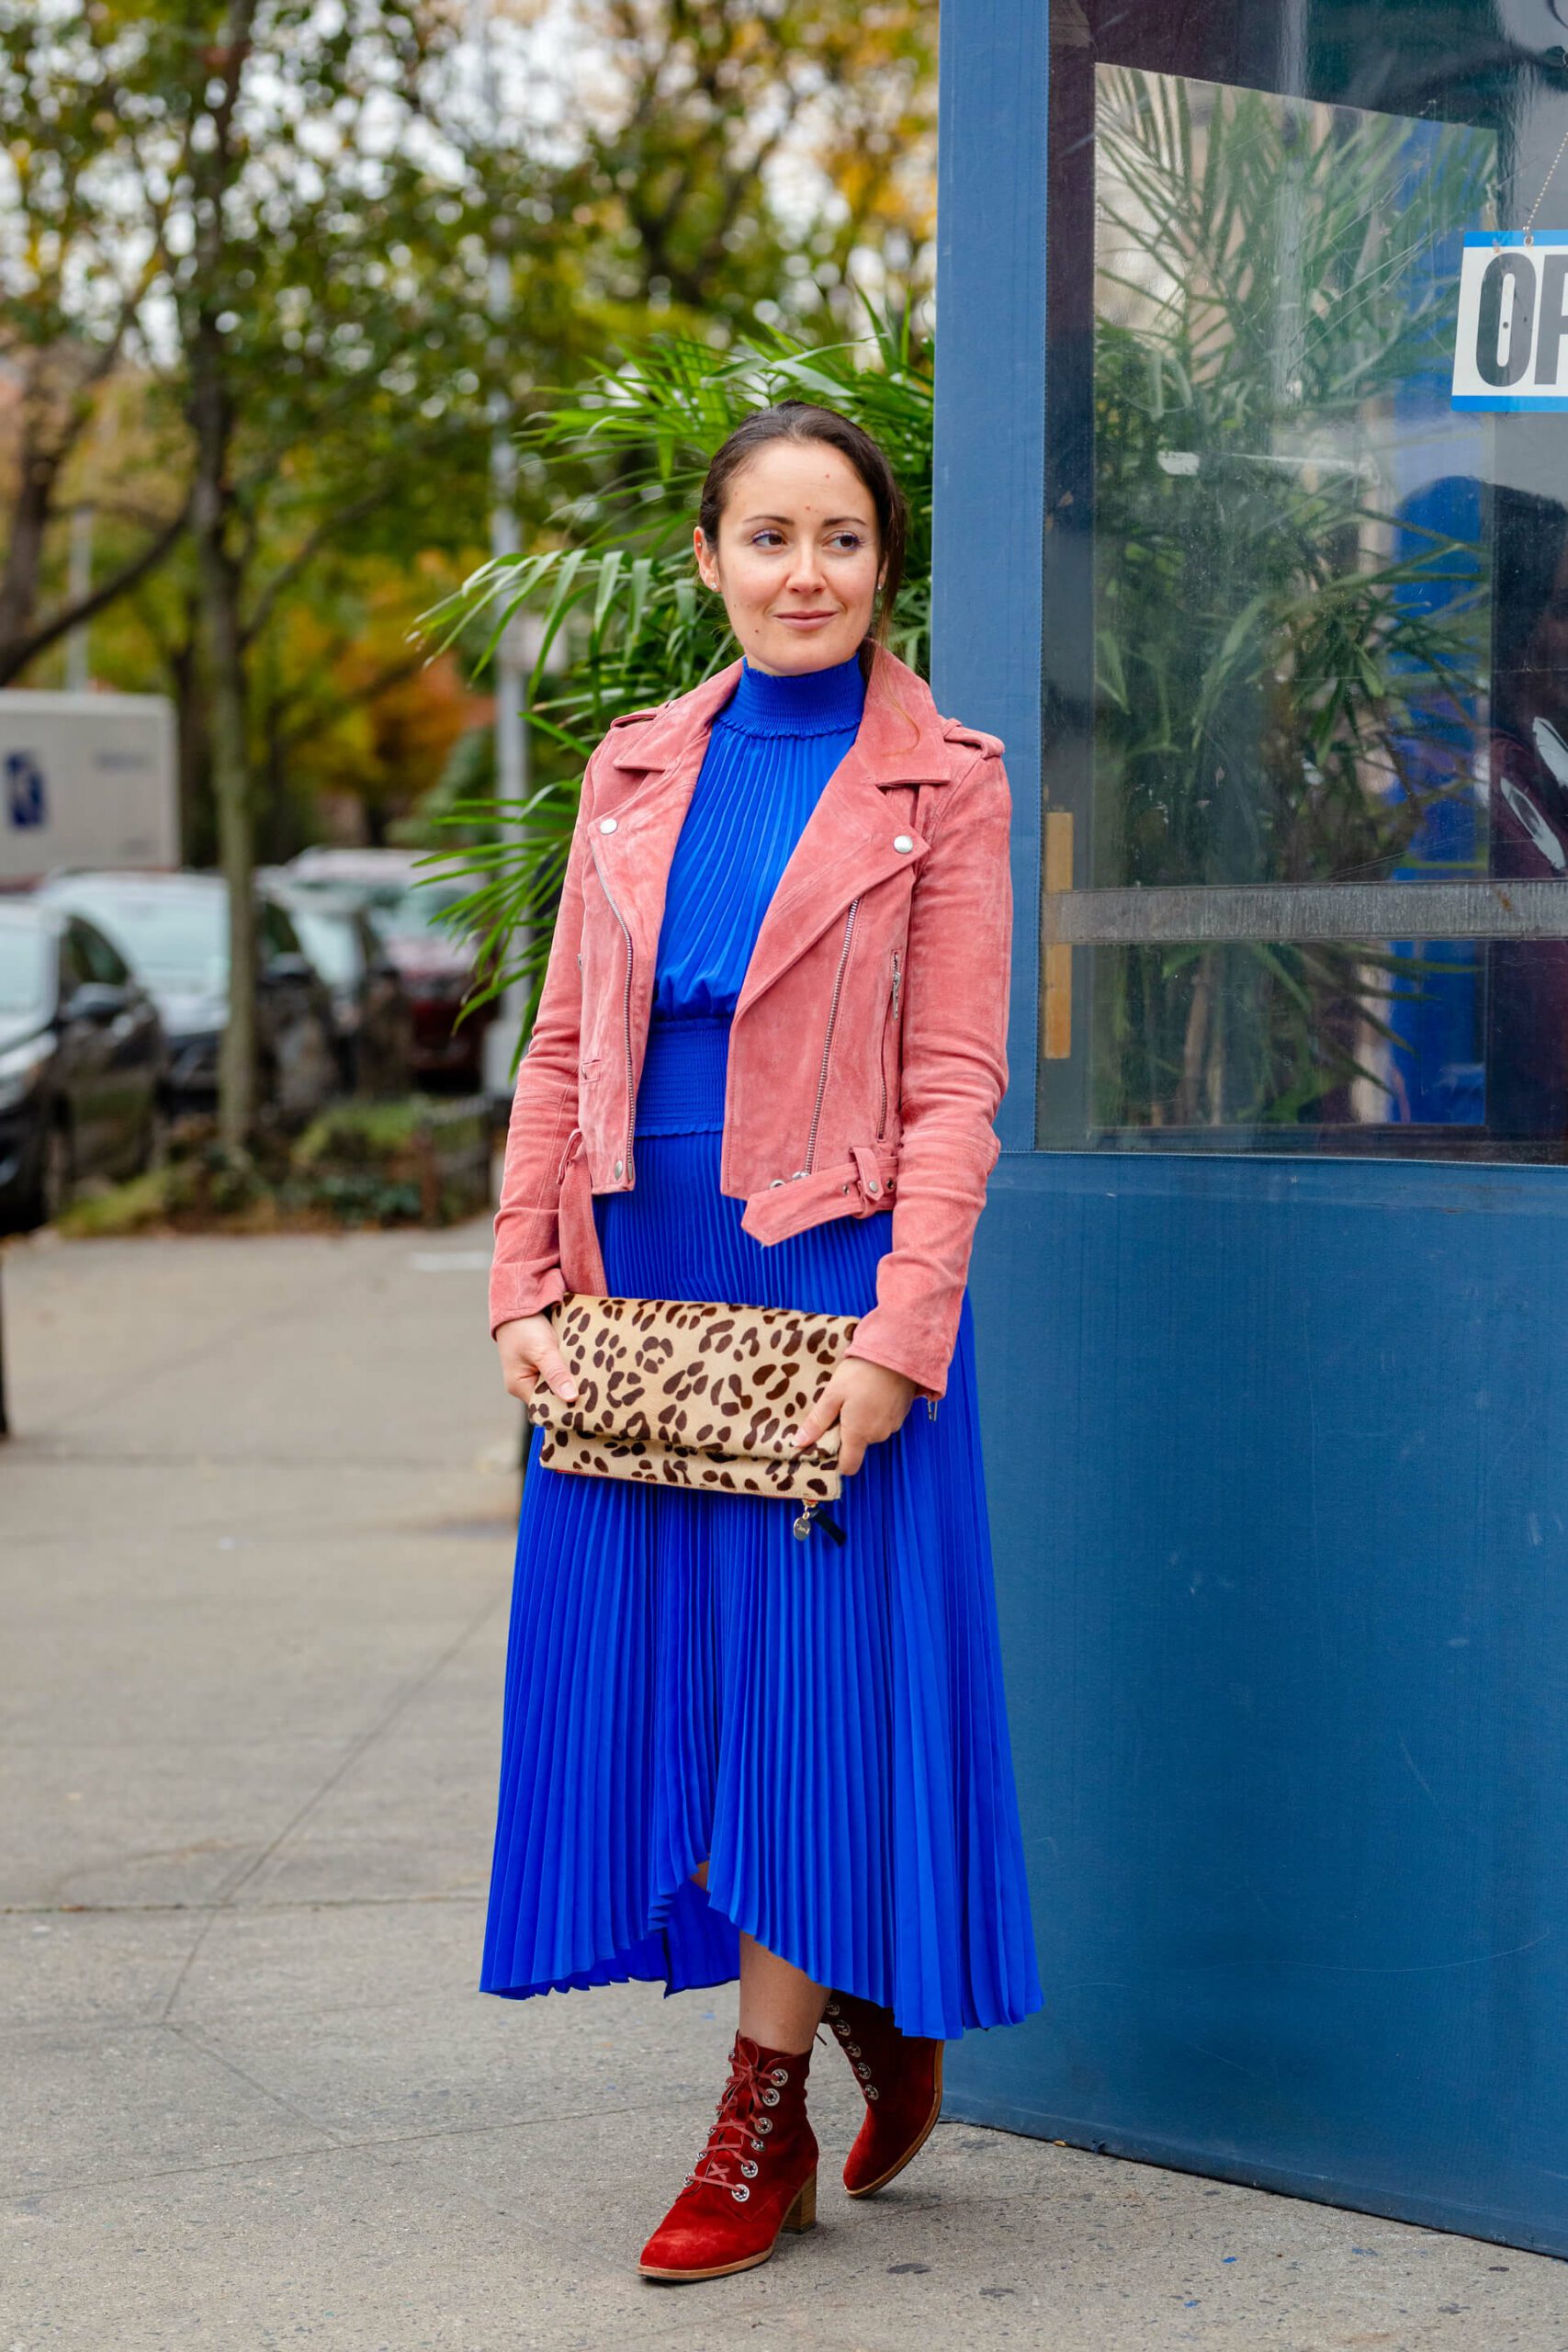 ALC Blue Dress with Suede Moto Look by Modnitsa Styling